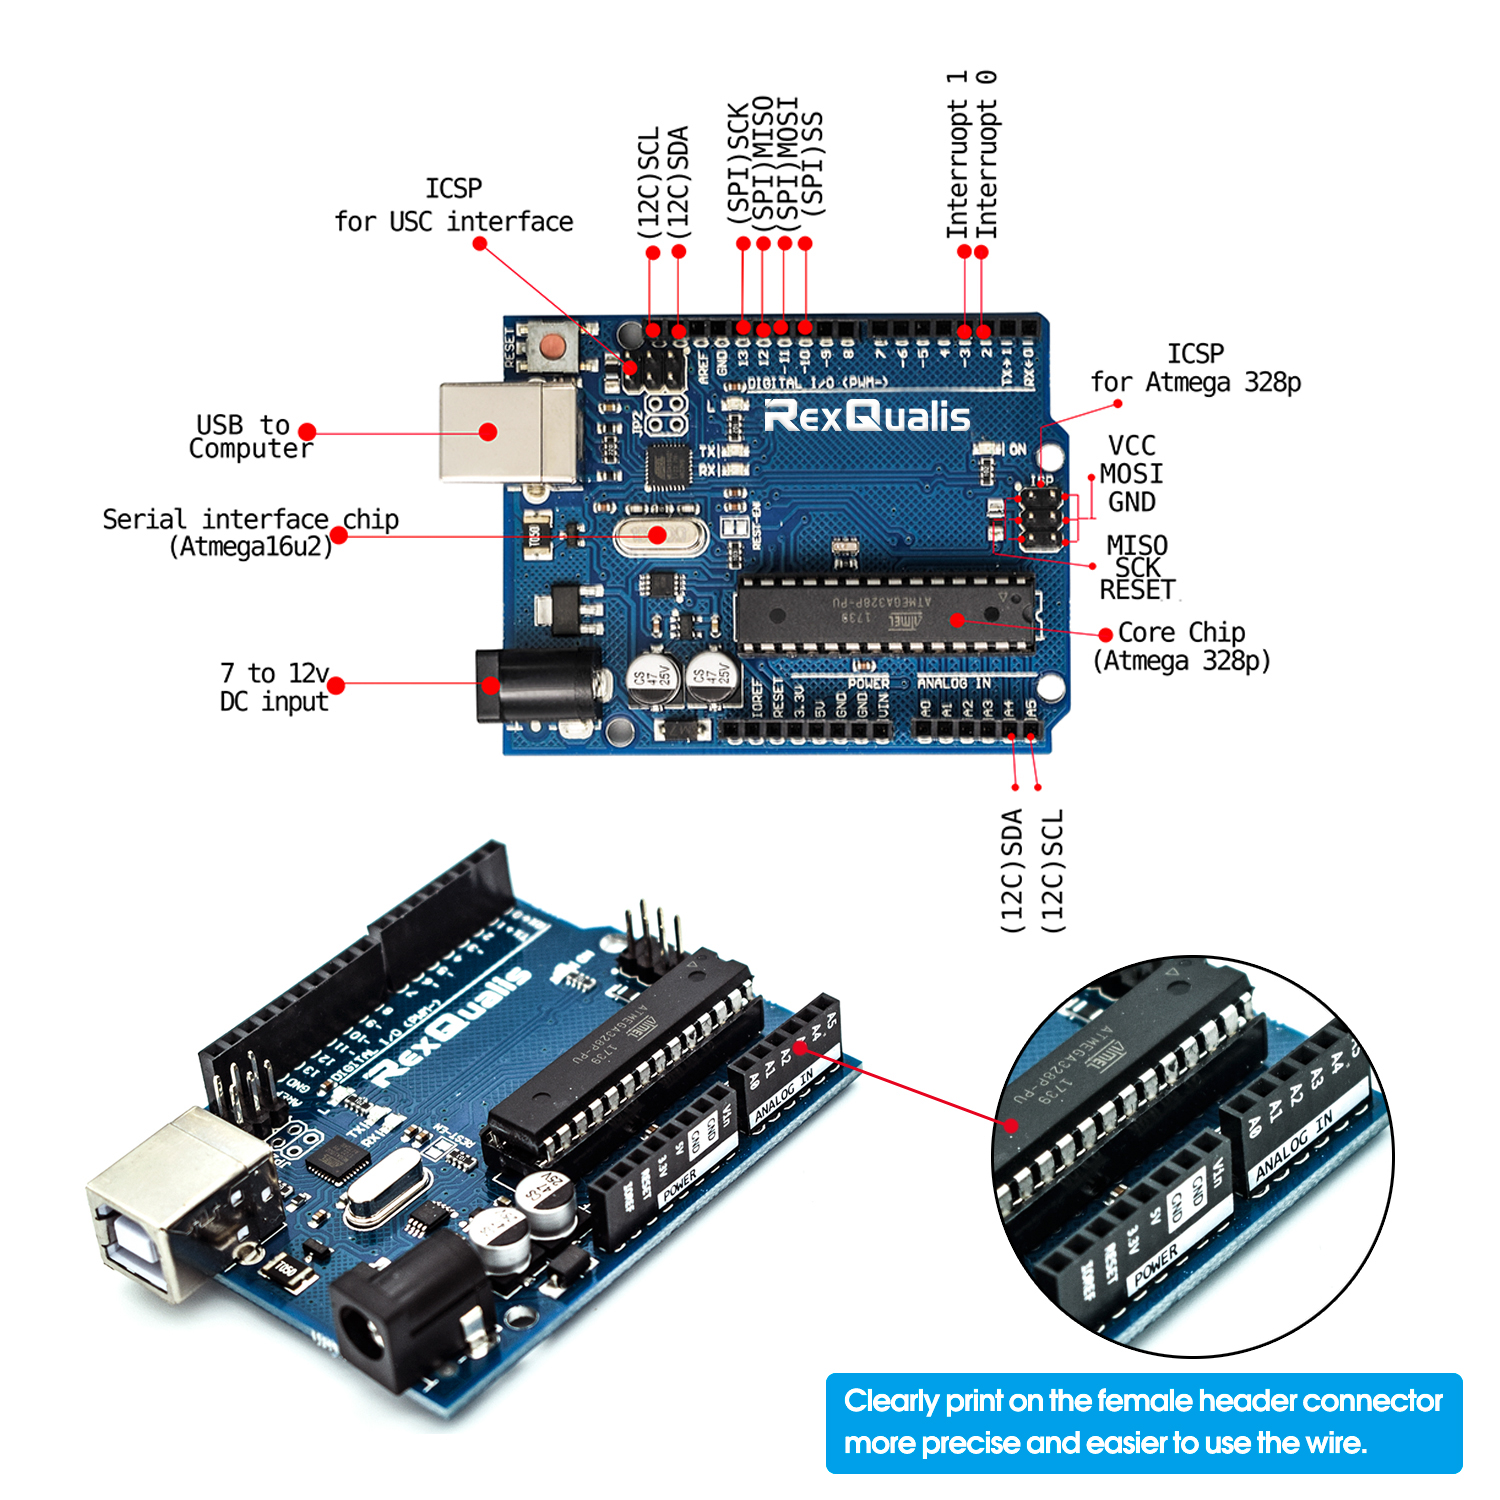 REXQualis Super Starter Kit based on Arduino UNO R3 with Tutorial and  Controller Board Compatible with Arduino IDE - Rexqualis  Industries,Ingenious 